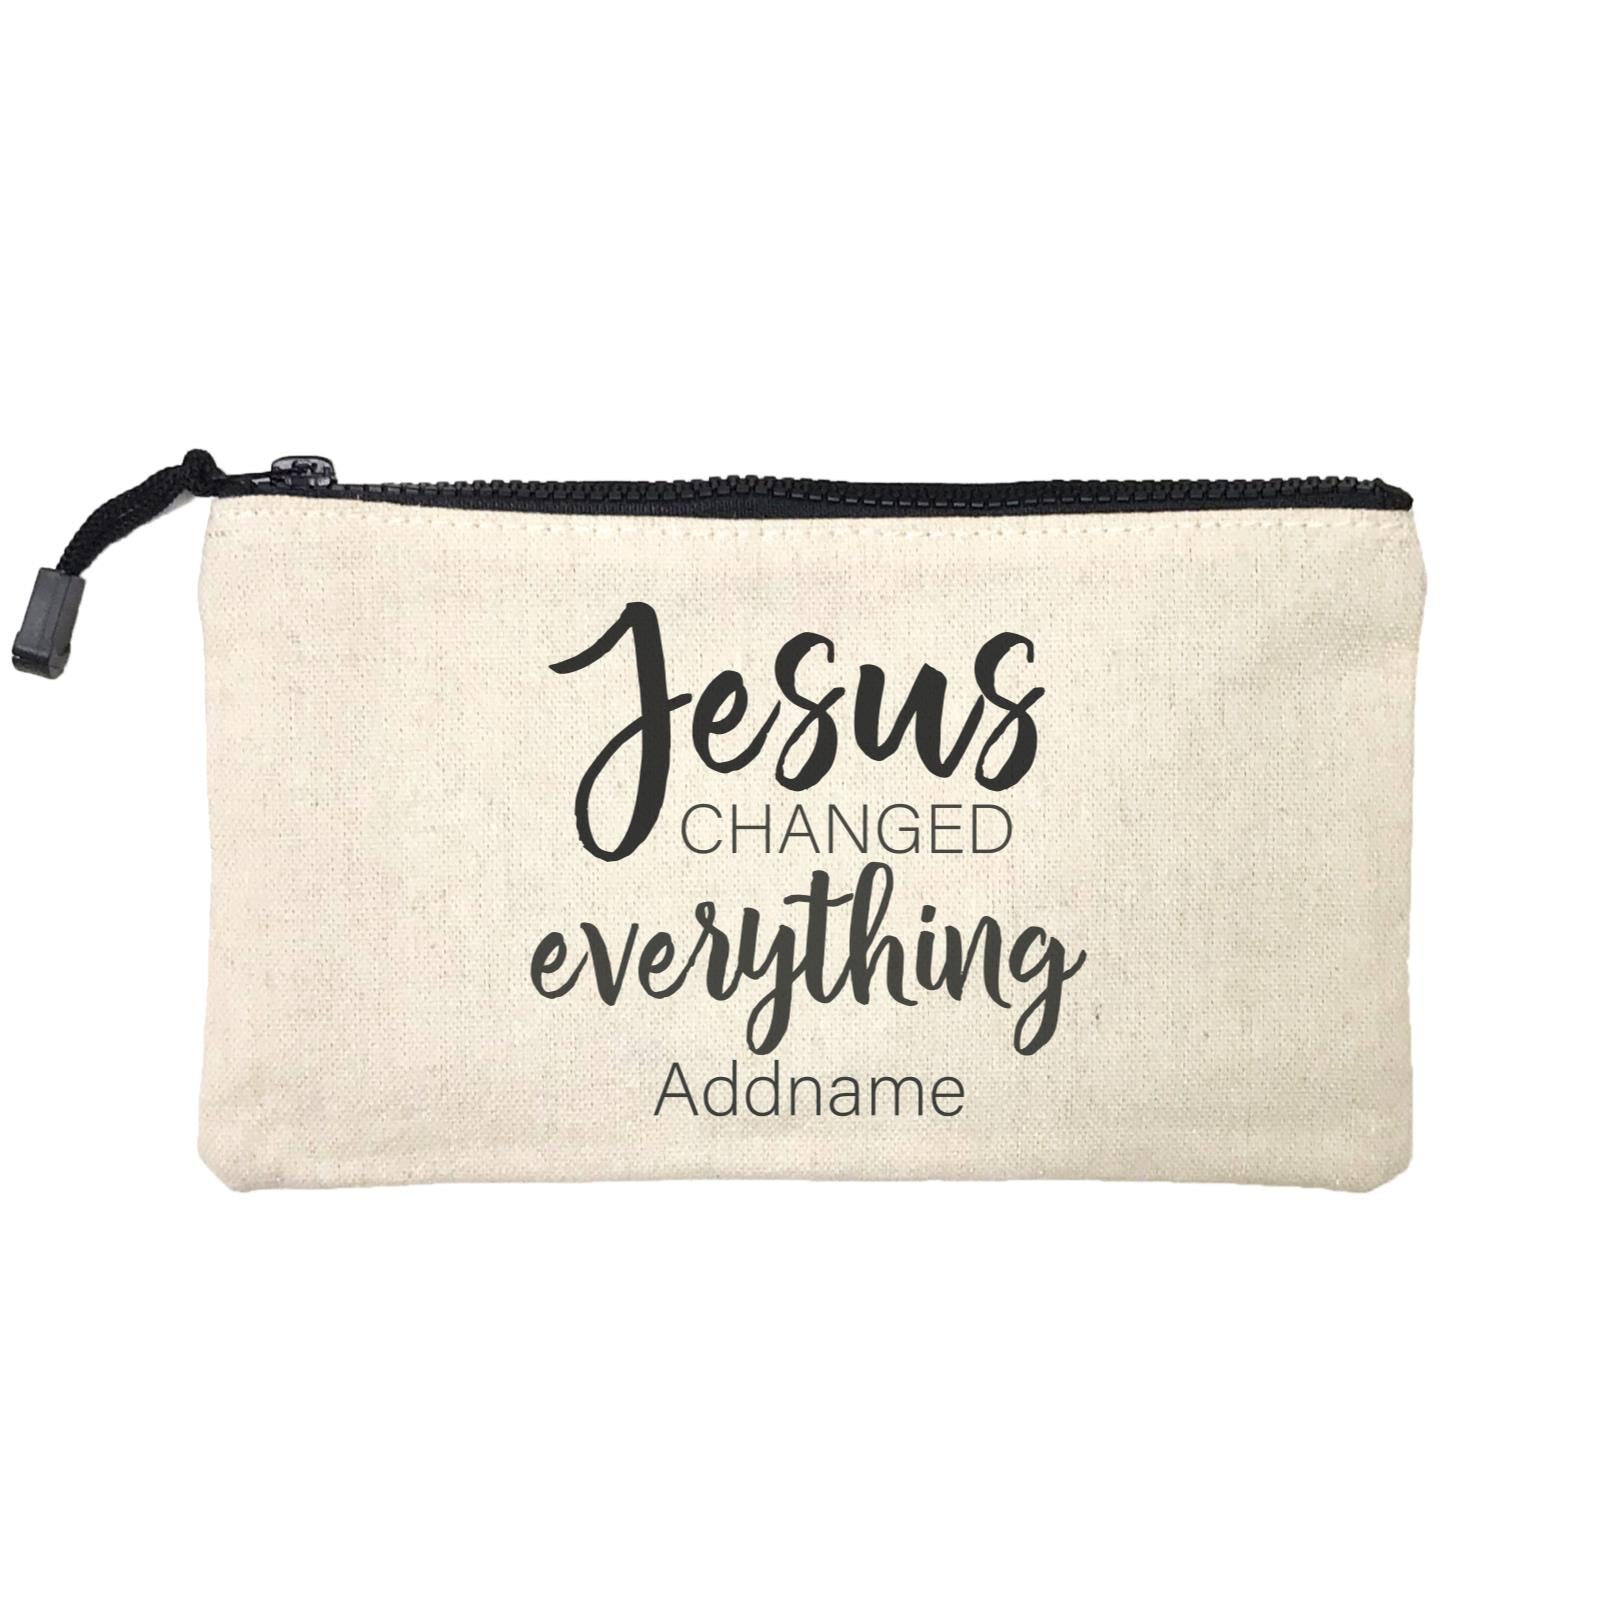 Christian Series Jesus Changed Everthing Addname Mini Accessories Stationery Pouch